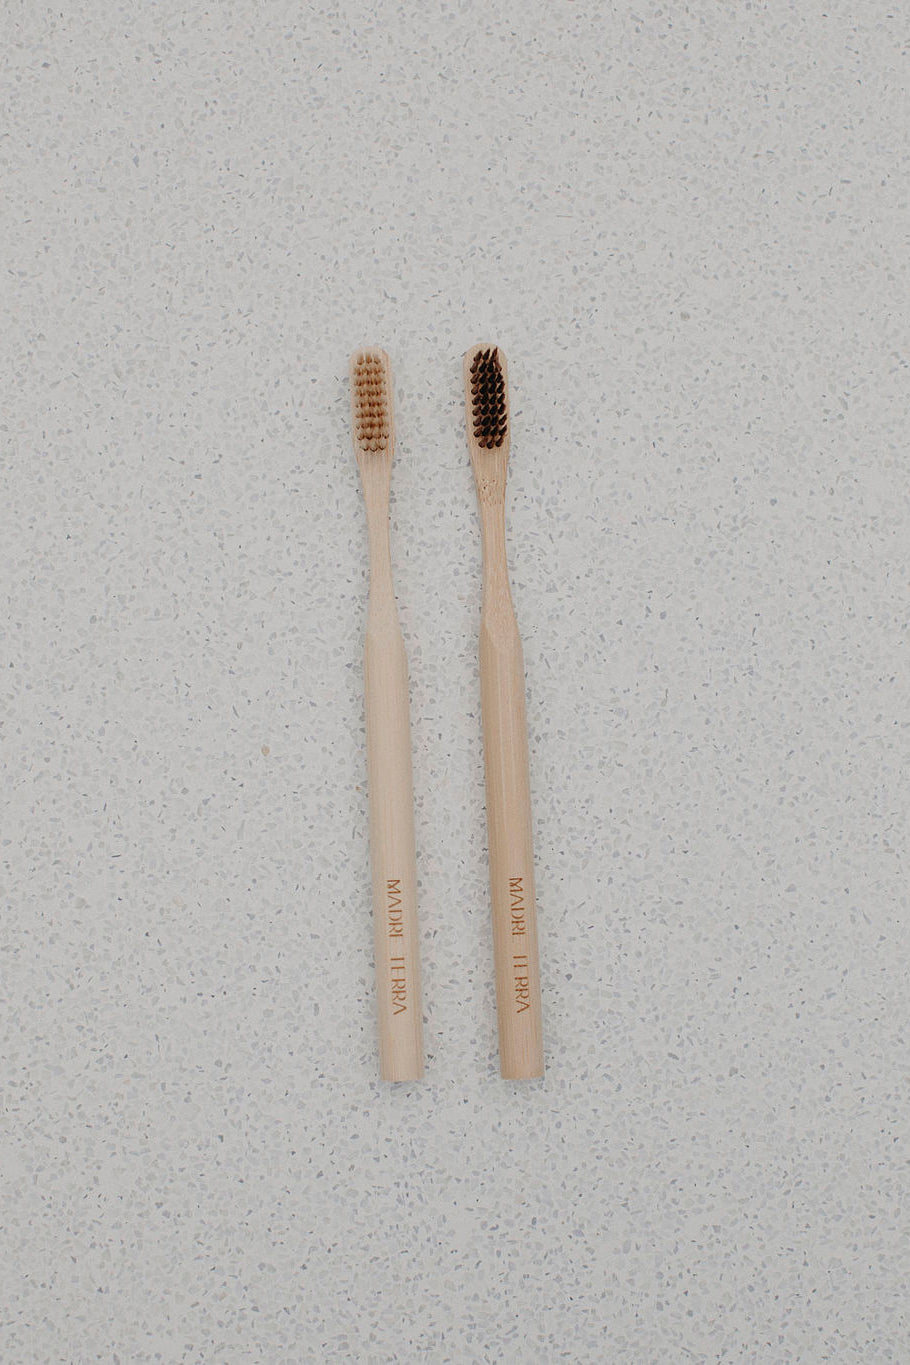 Bamboo Toothbrush - 2 Pack - Beige and Brown